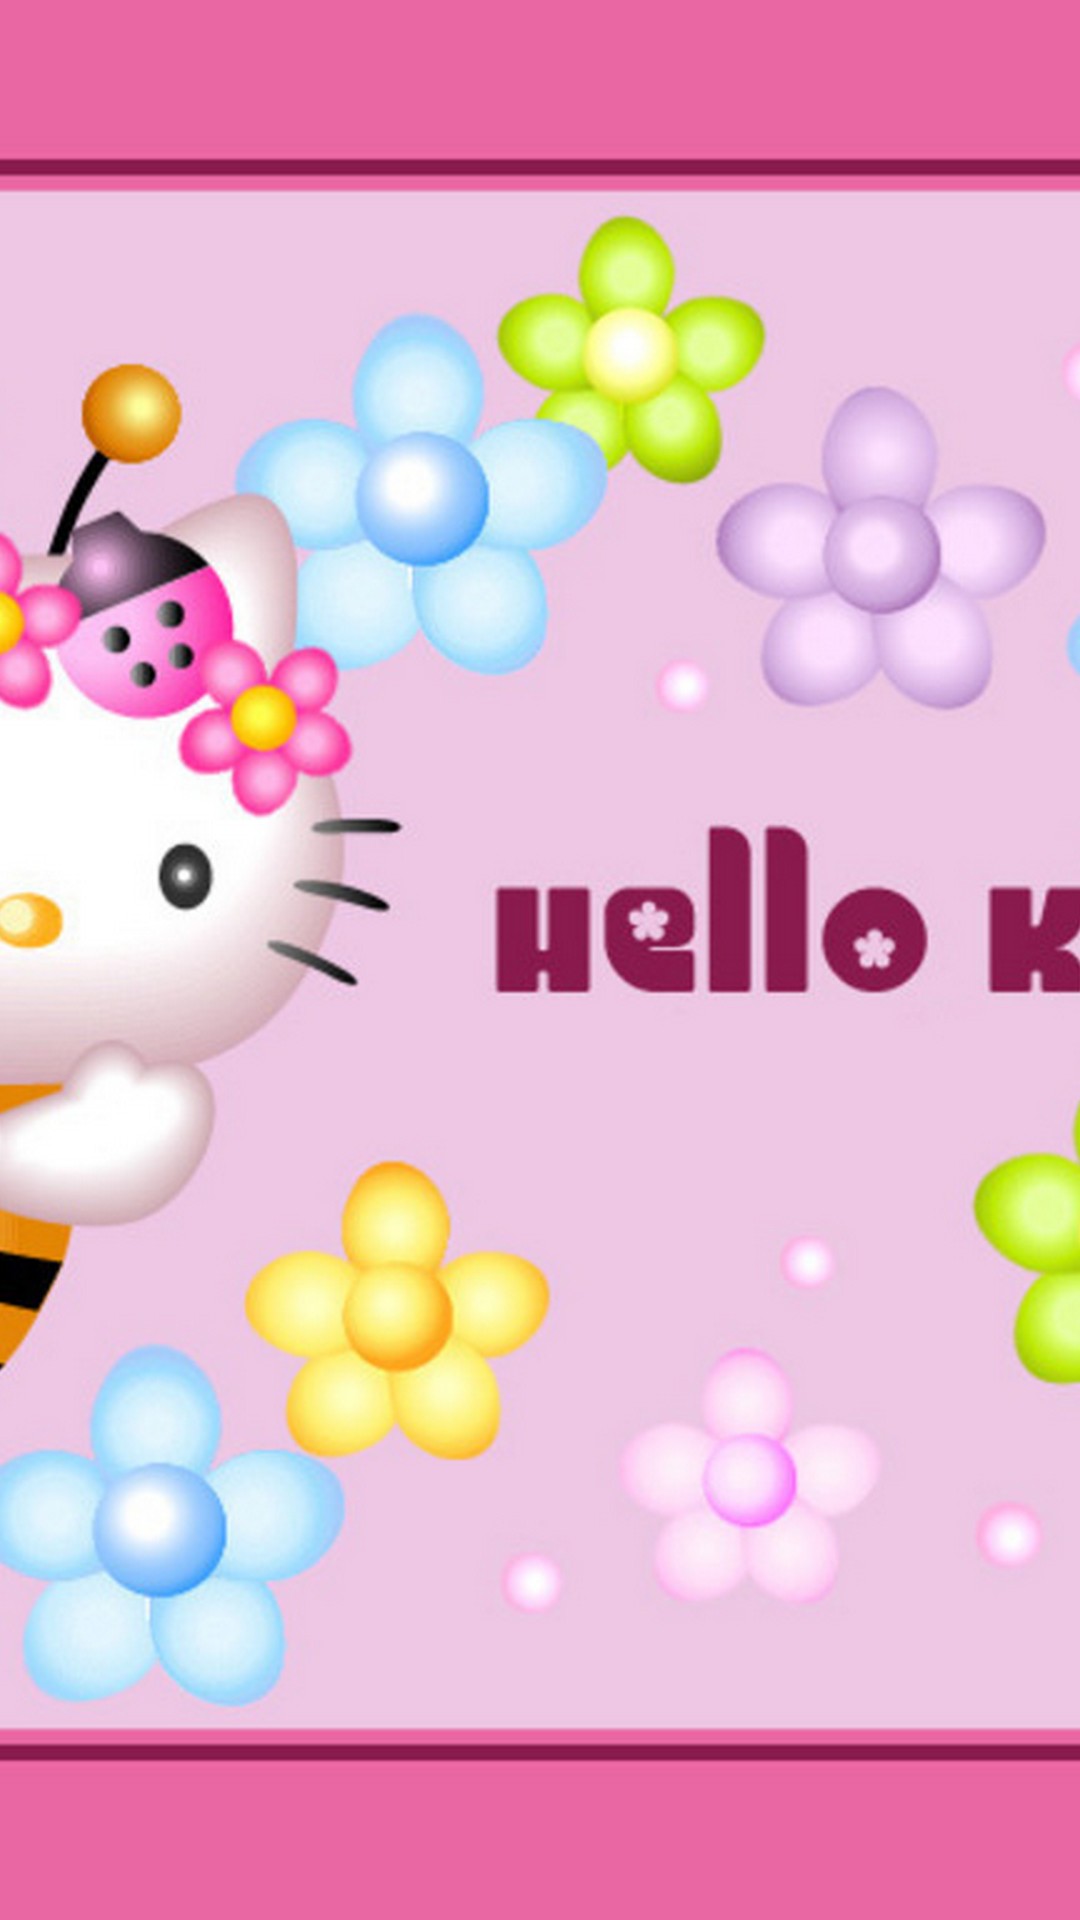 Hello Kitty iPhone X Wallpaper with image resolution 1080x1920 pixel. You can use this wallpaper as background for your desktop Computer Screensavers, Android or iPhone smartphones